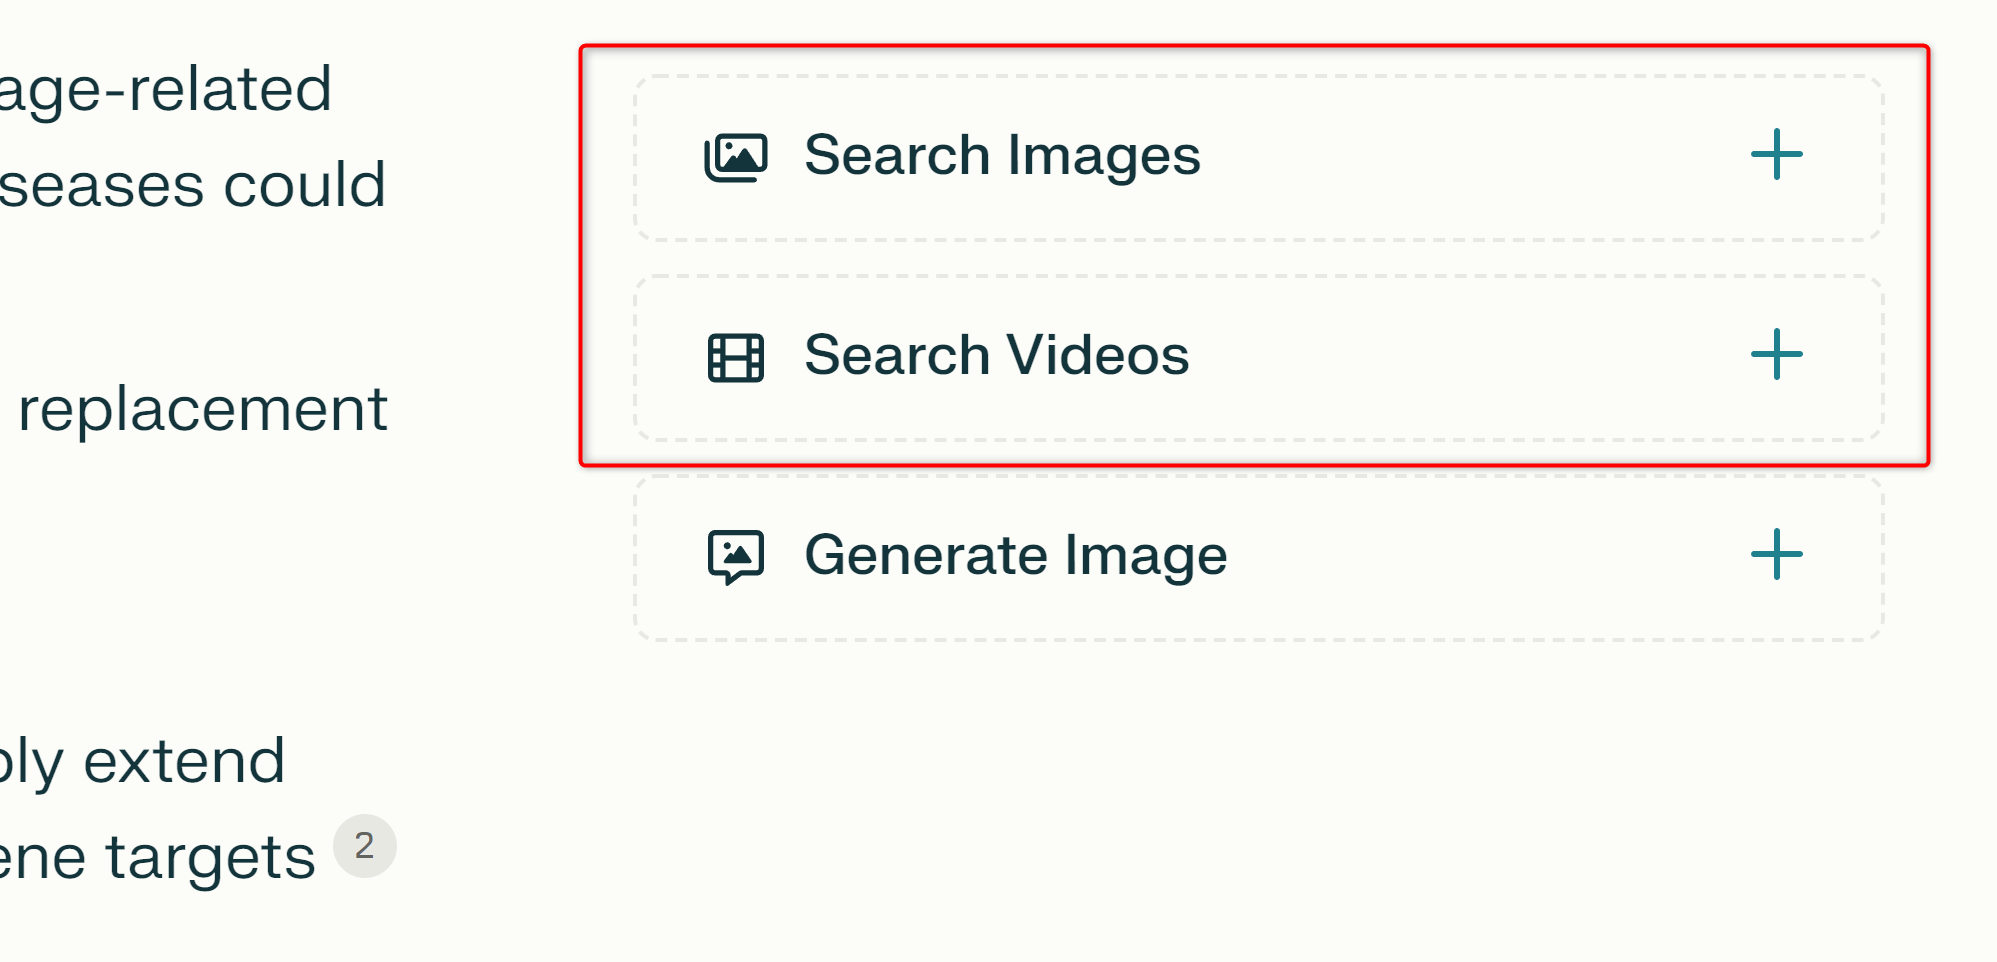 Use Perplexity to Search Images and Videos